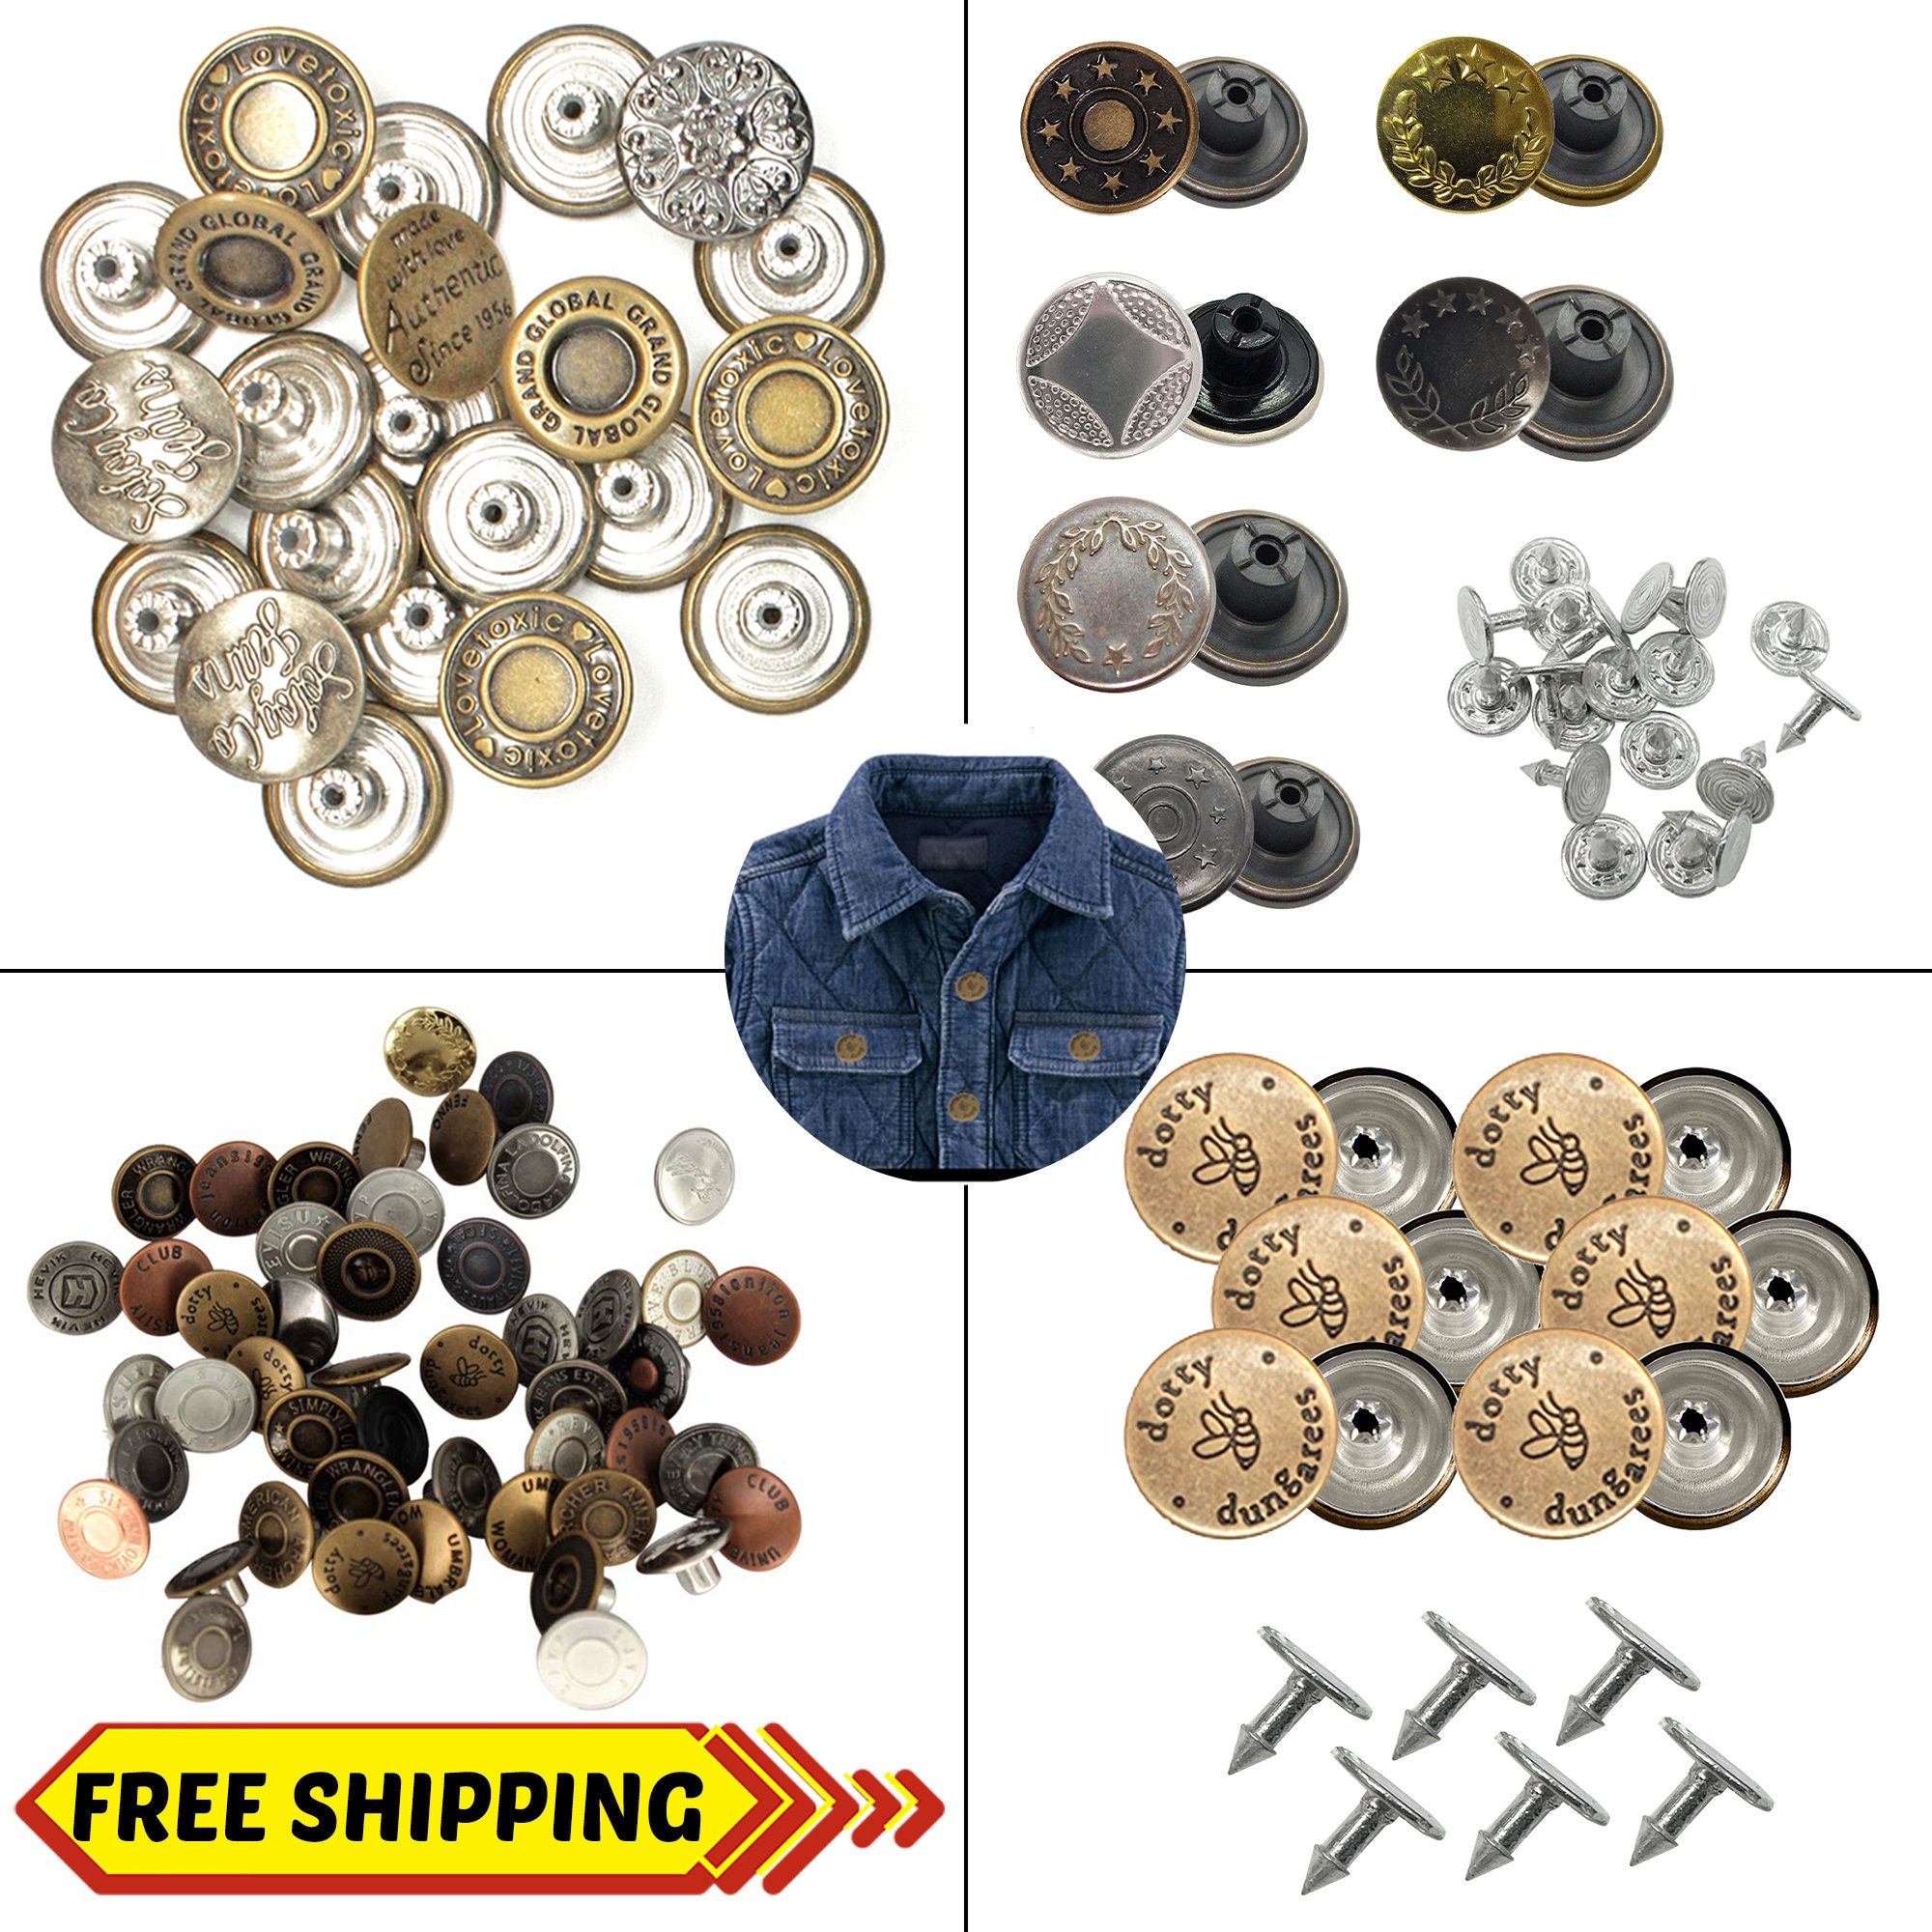 Jeans Buttons KAM 20mm No Sew Jean Button Replacement Metal Jeans Button  With Pins Reusable for Clothing Repair, Denim, Jeans, Jackets 